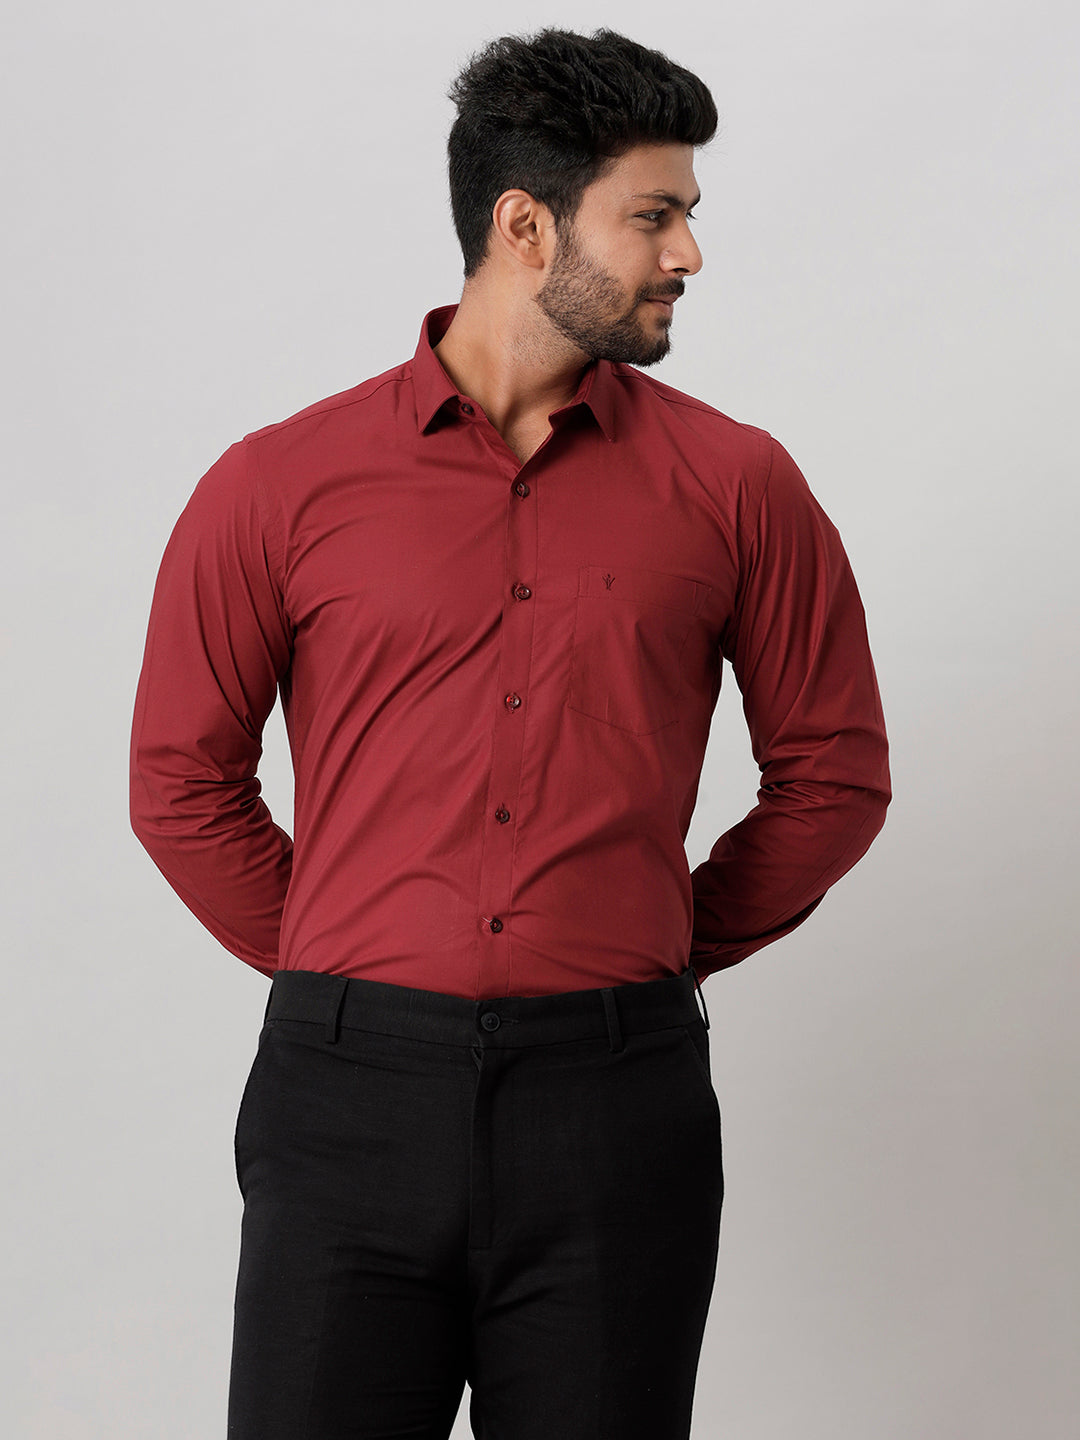 Mens Formal Cotton Spandex 2 Way Stretch Maroon Full Sleeves Shirt LY6